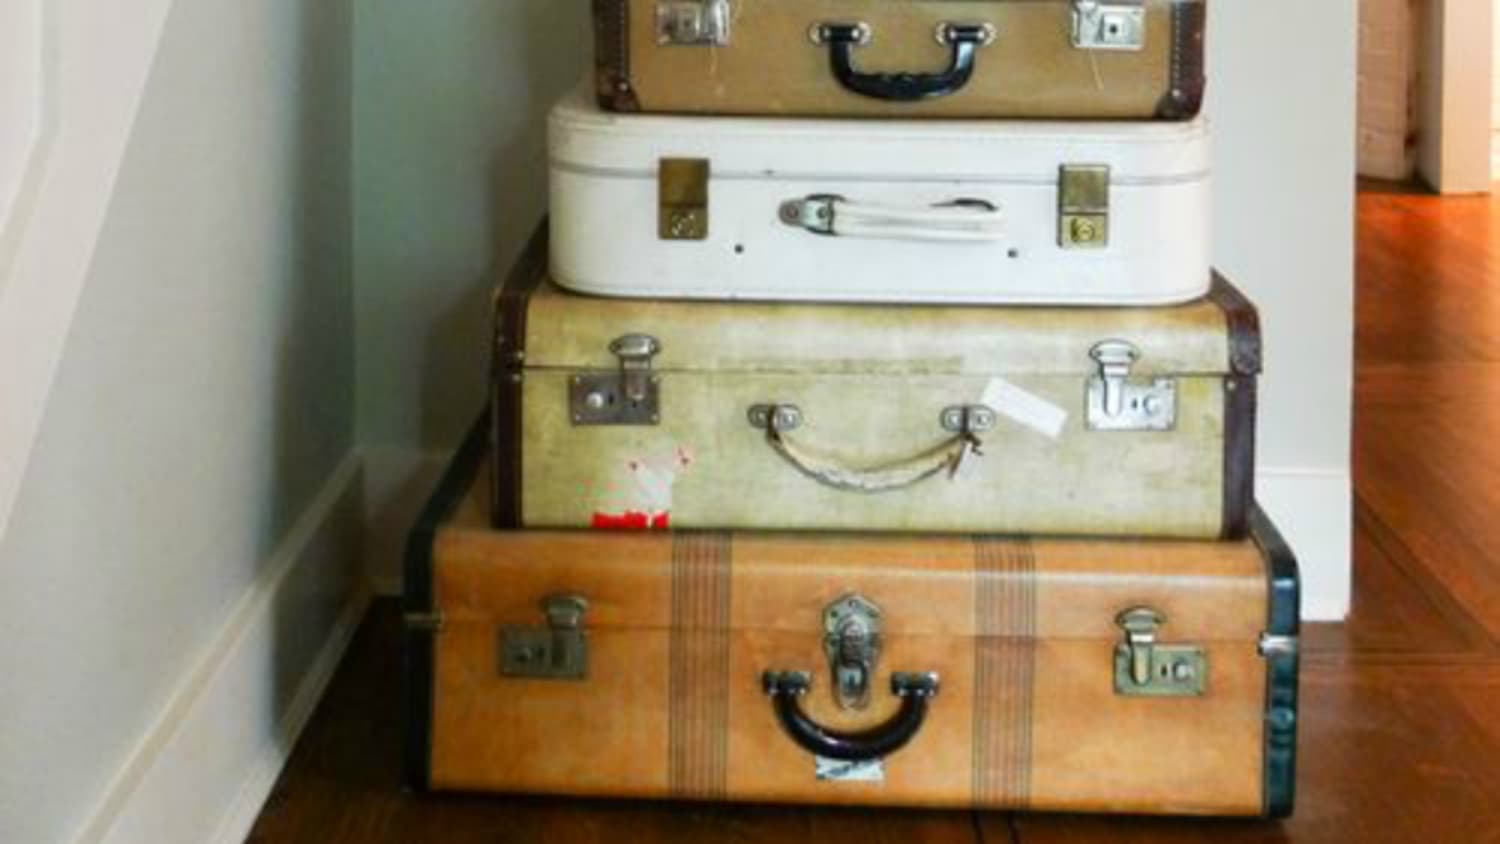 Vintage Luggage Decor with an Old Suitcase